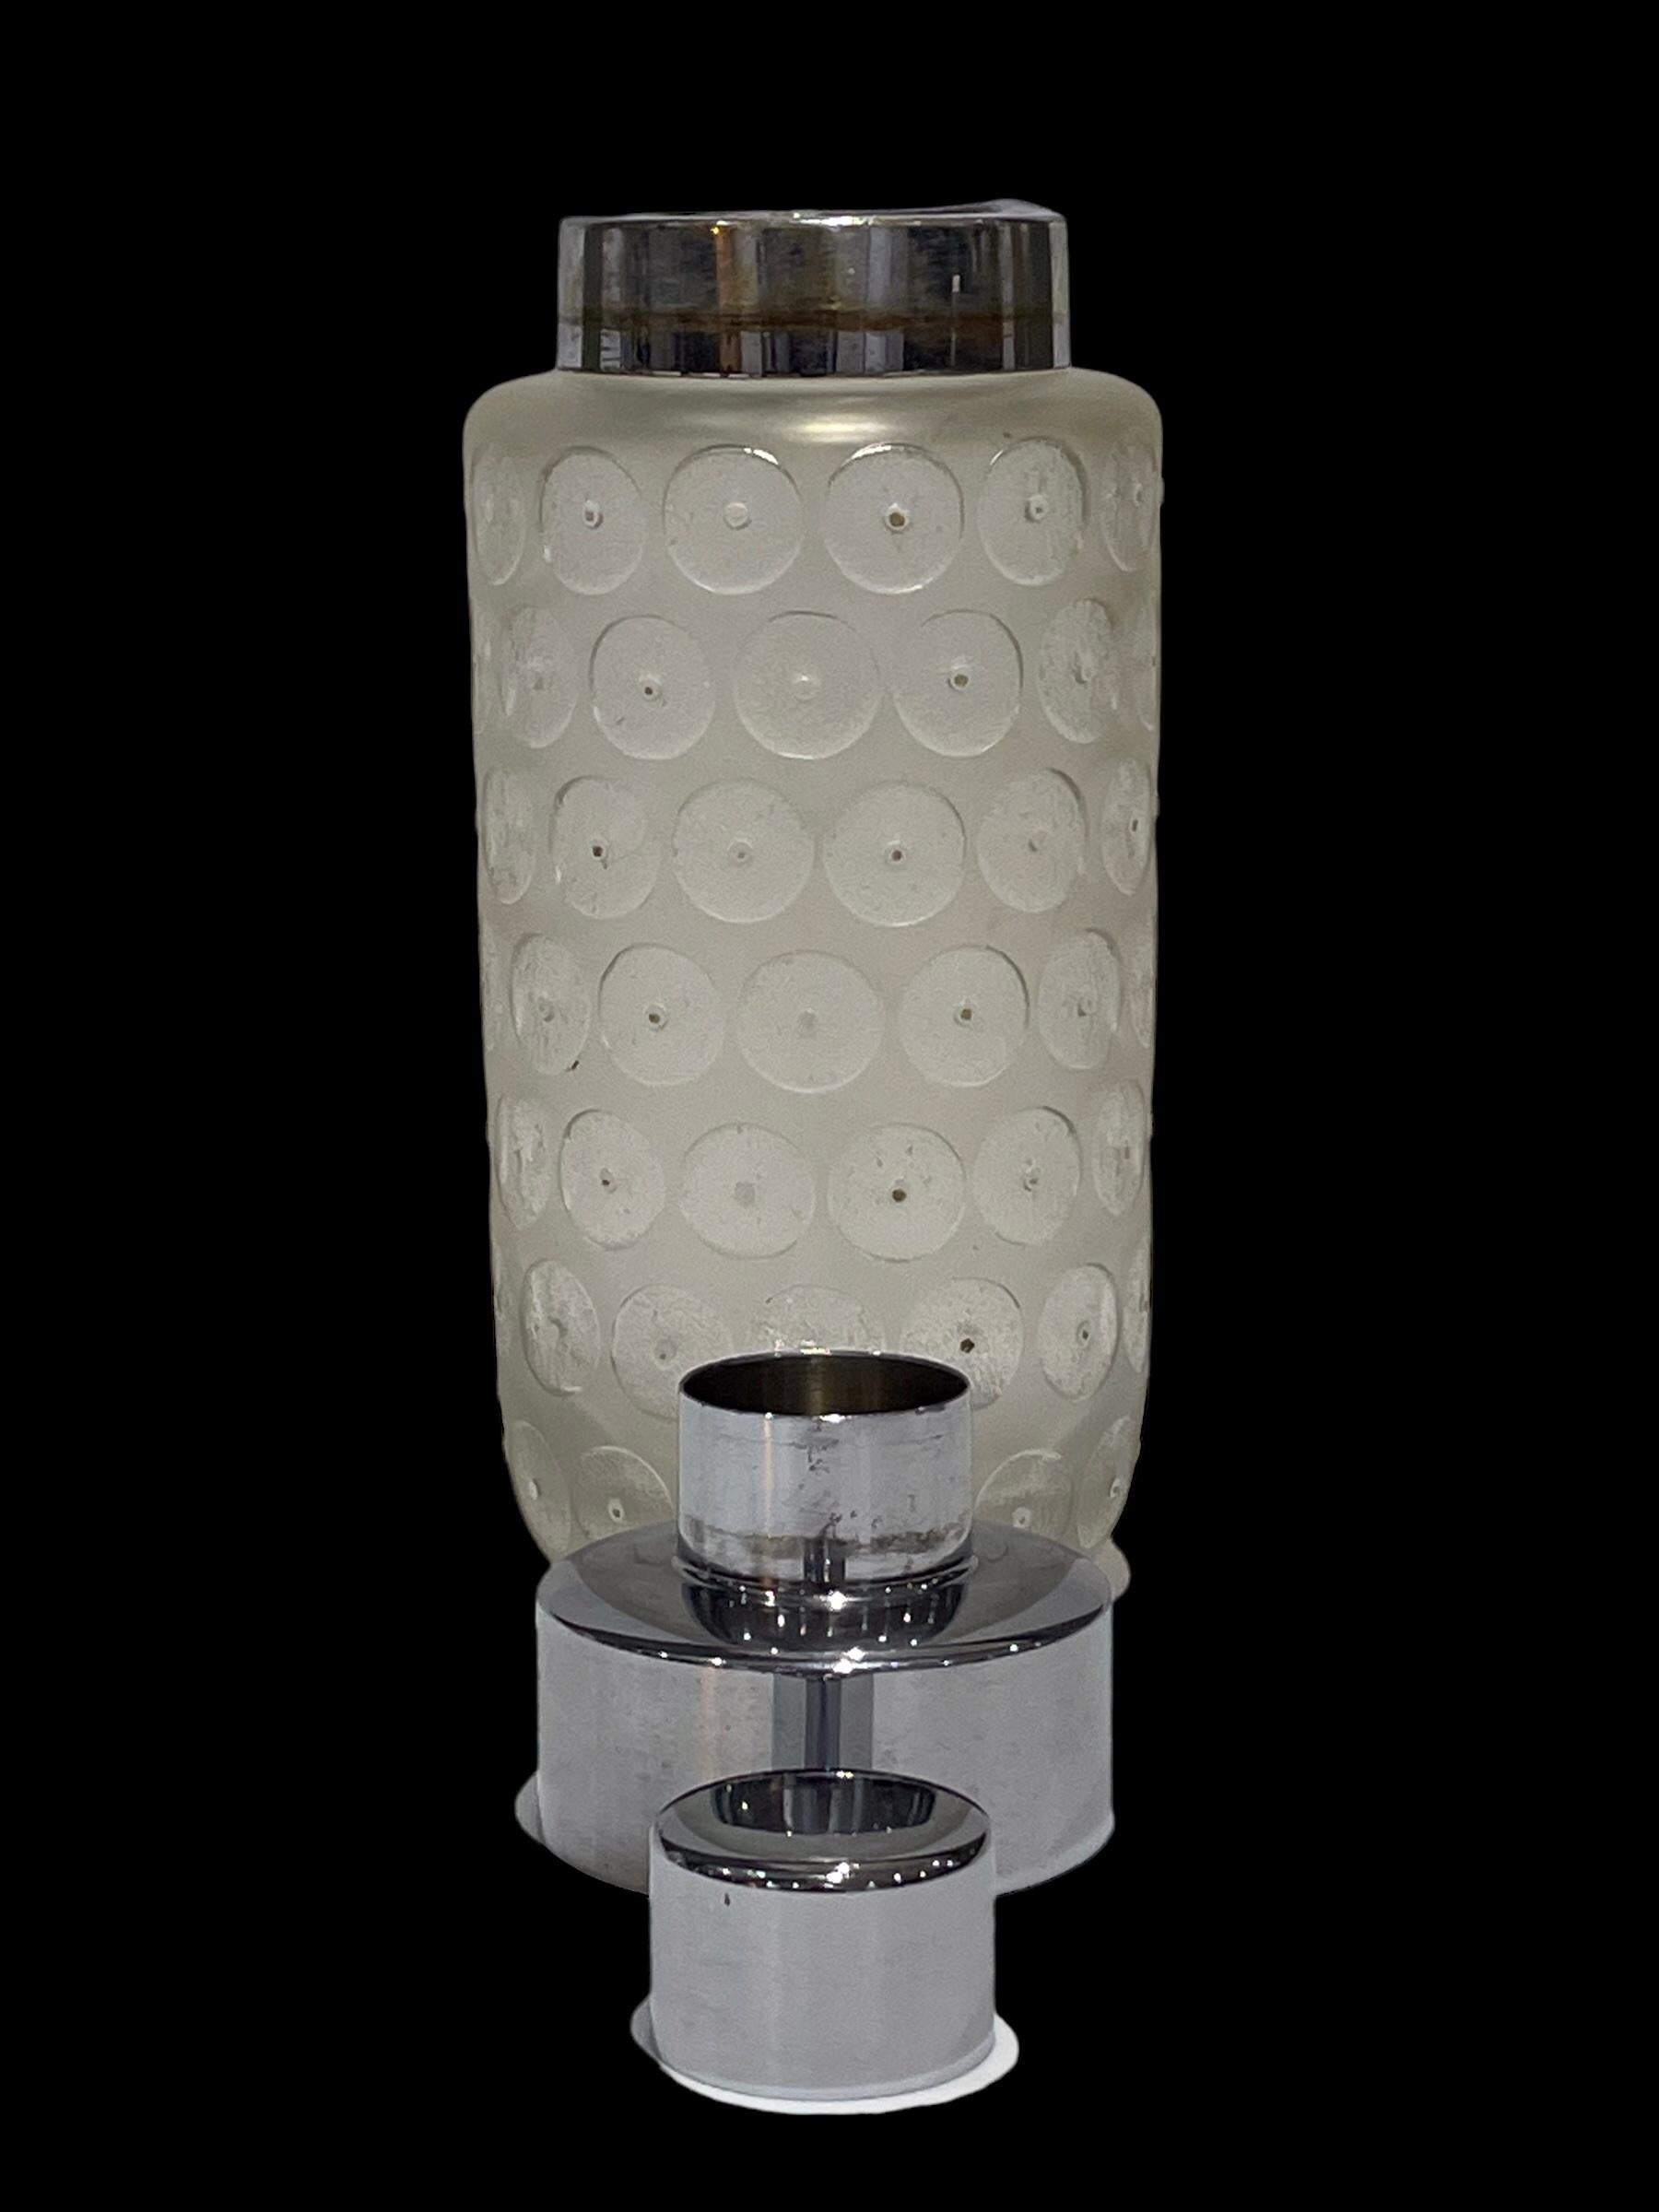 An Art Cocktail Shaker by Daum. A rare pattern, the thick opaque glass with acid etched circles throughout the surface. Each circle with a textured surface, in contrast with the smoothness of the opaque glass. The centre of each circle decorated in